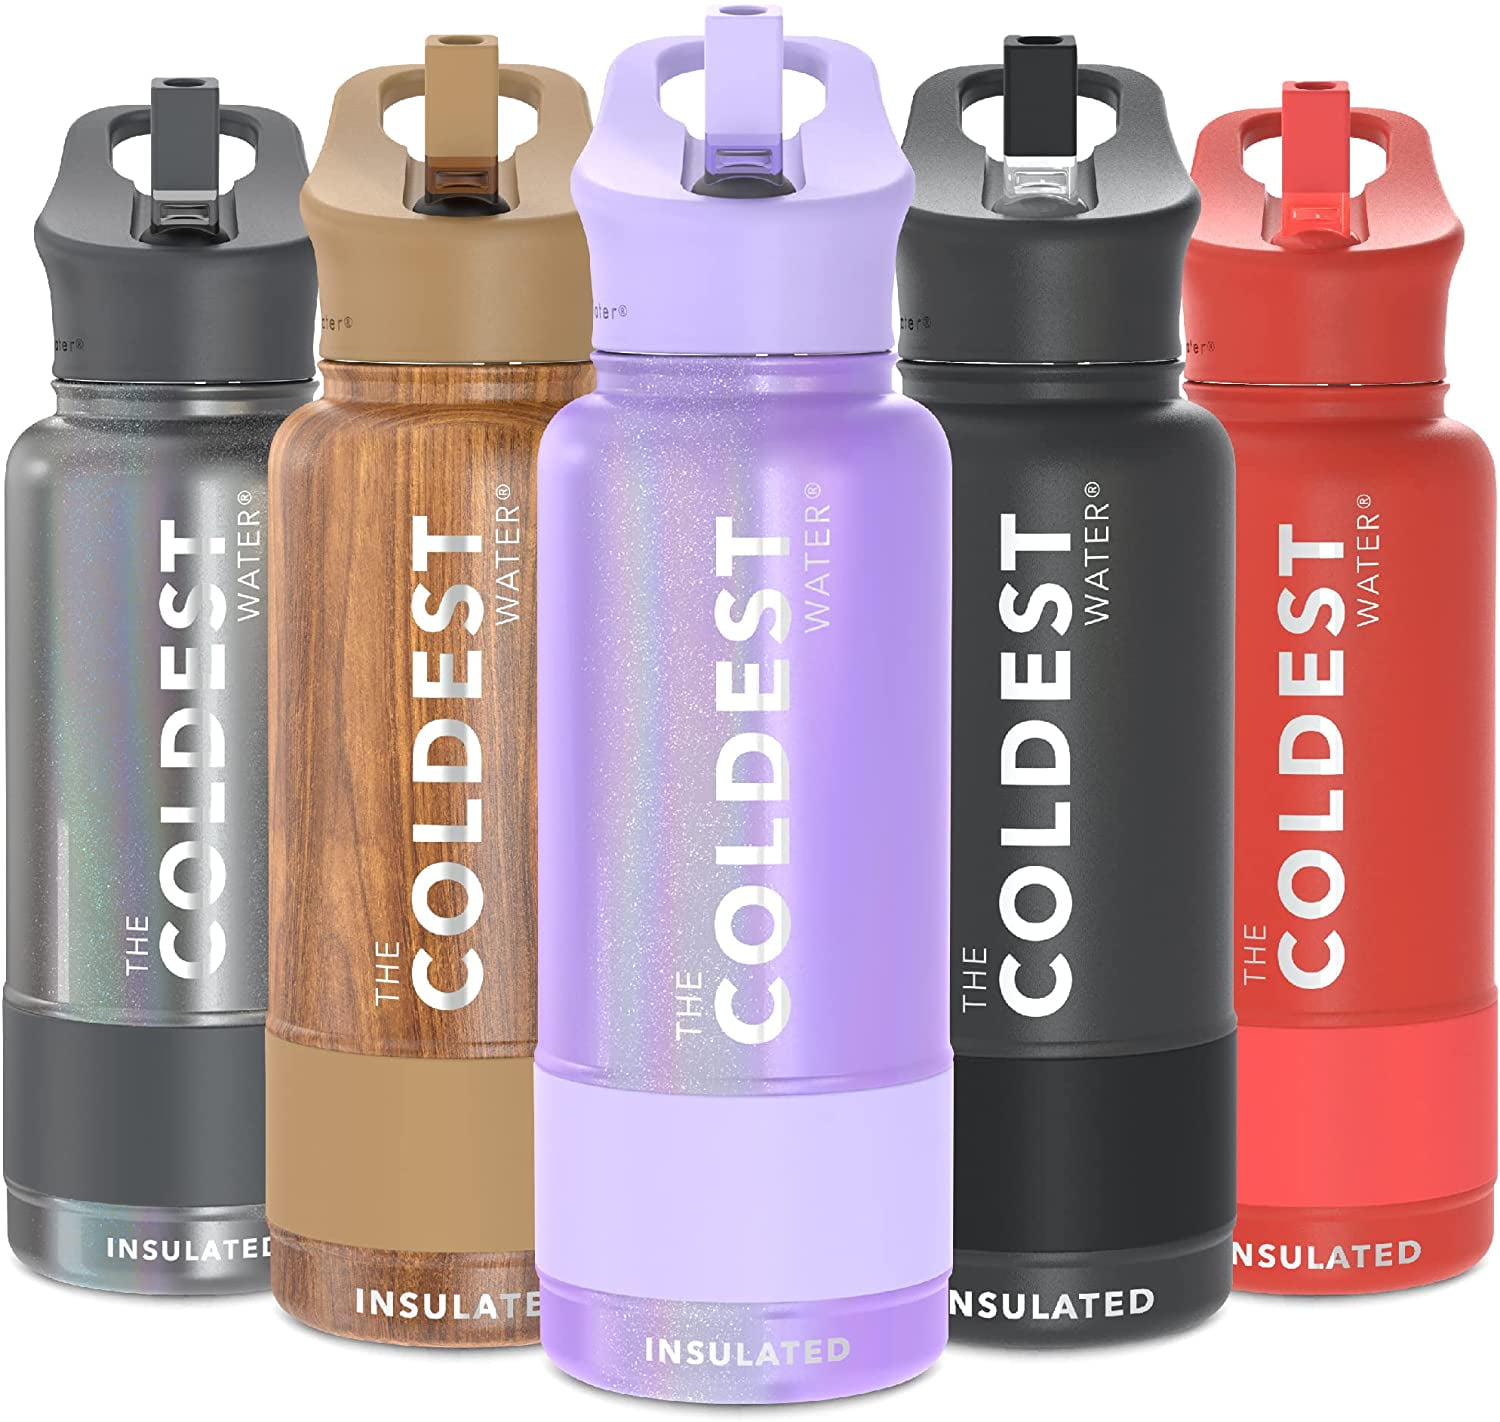 Cool Yoleb 32 oz Insulated Water Bottle with Straw & Spout Lid, Leak Proof  Metal Water Bottles, Stai…See more Cool Yoleb 32 oz Insulated Water Bottle